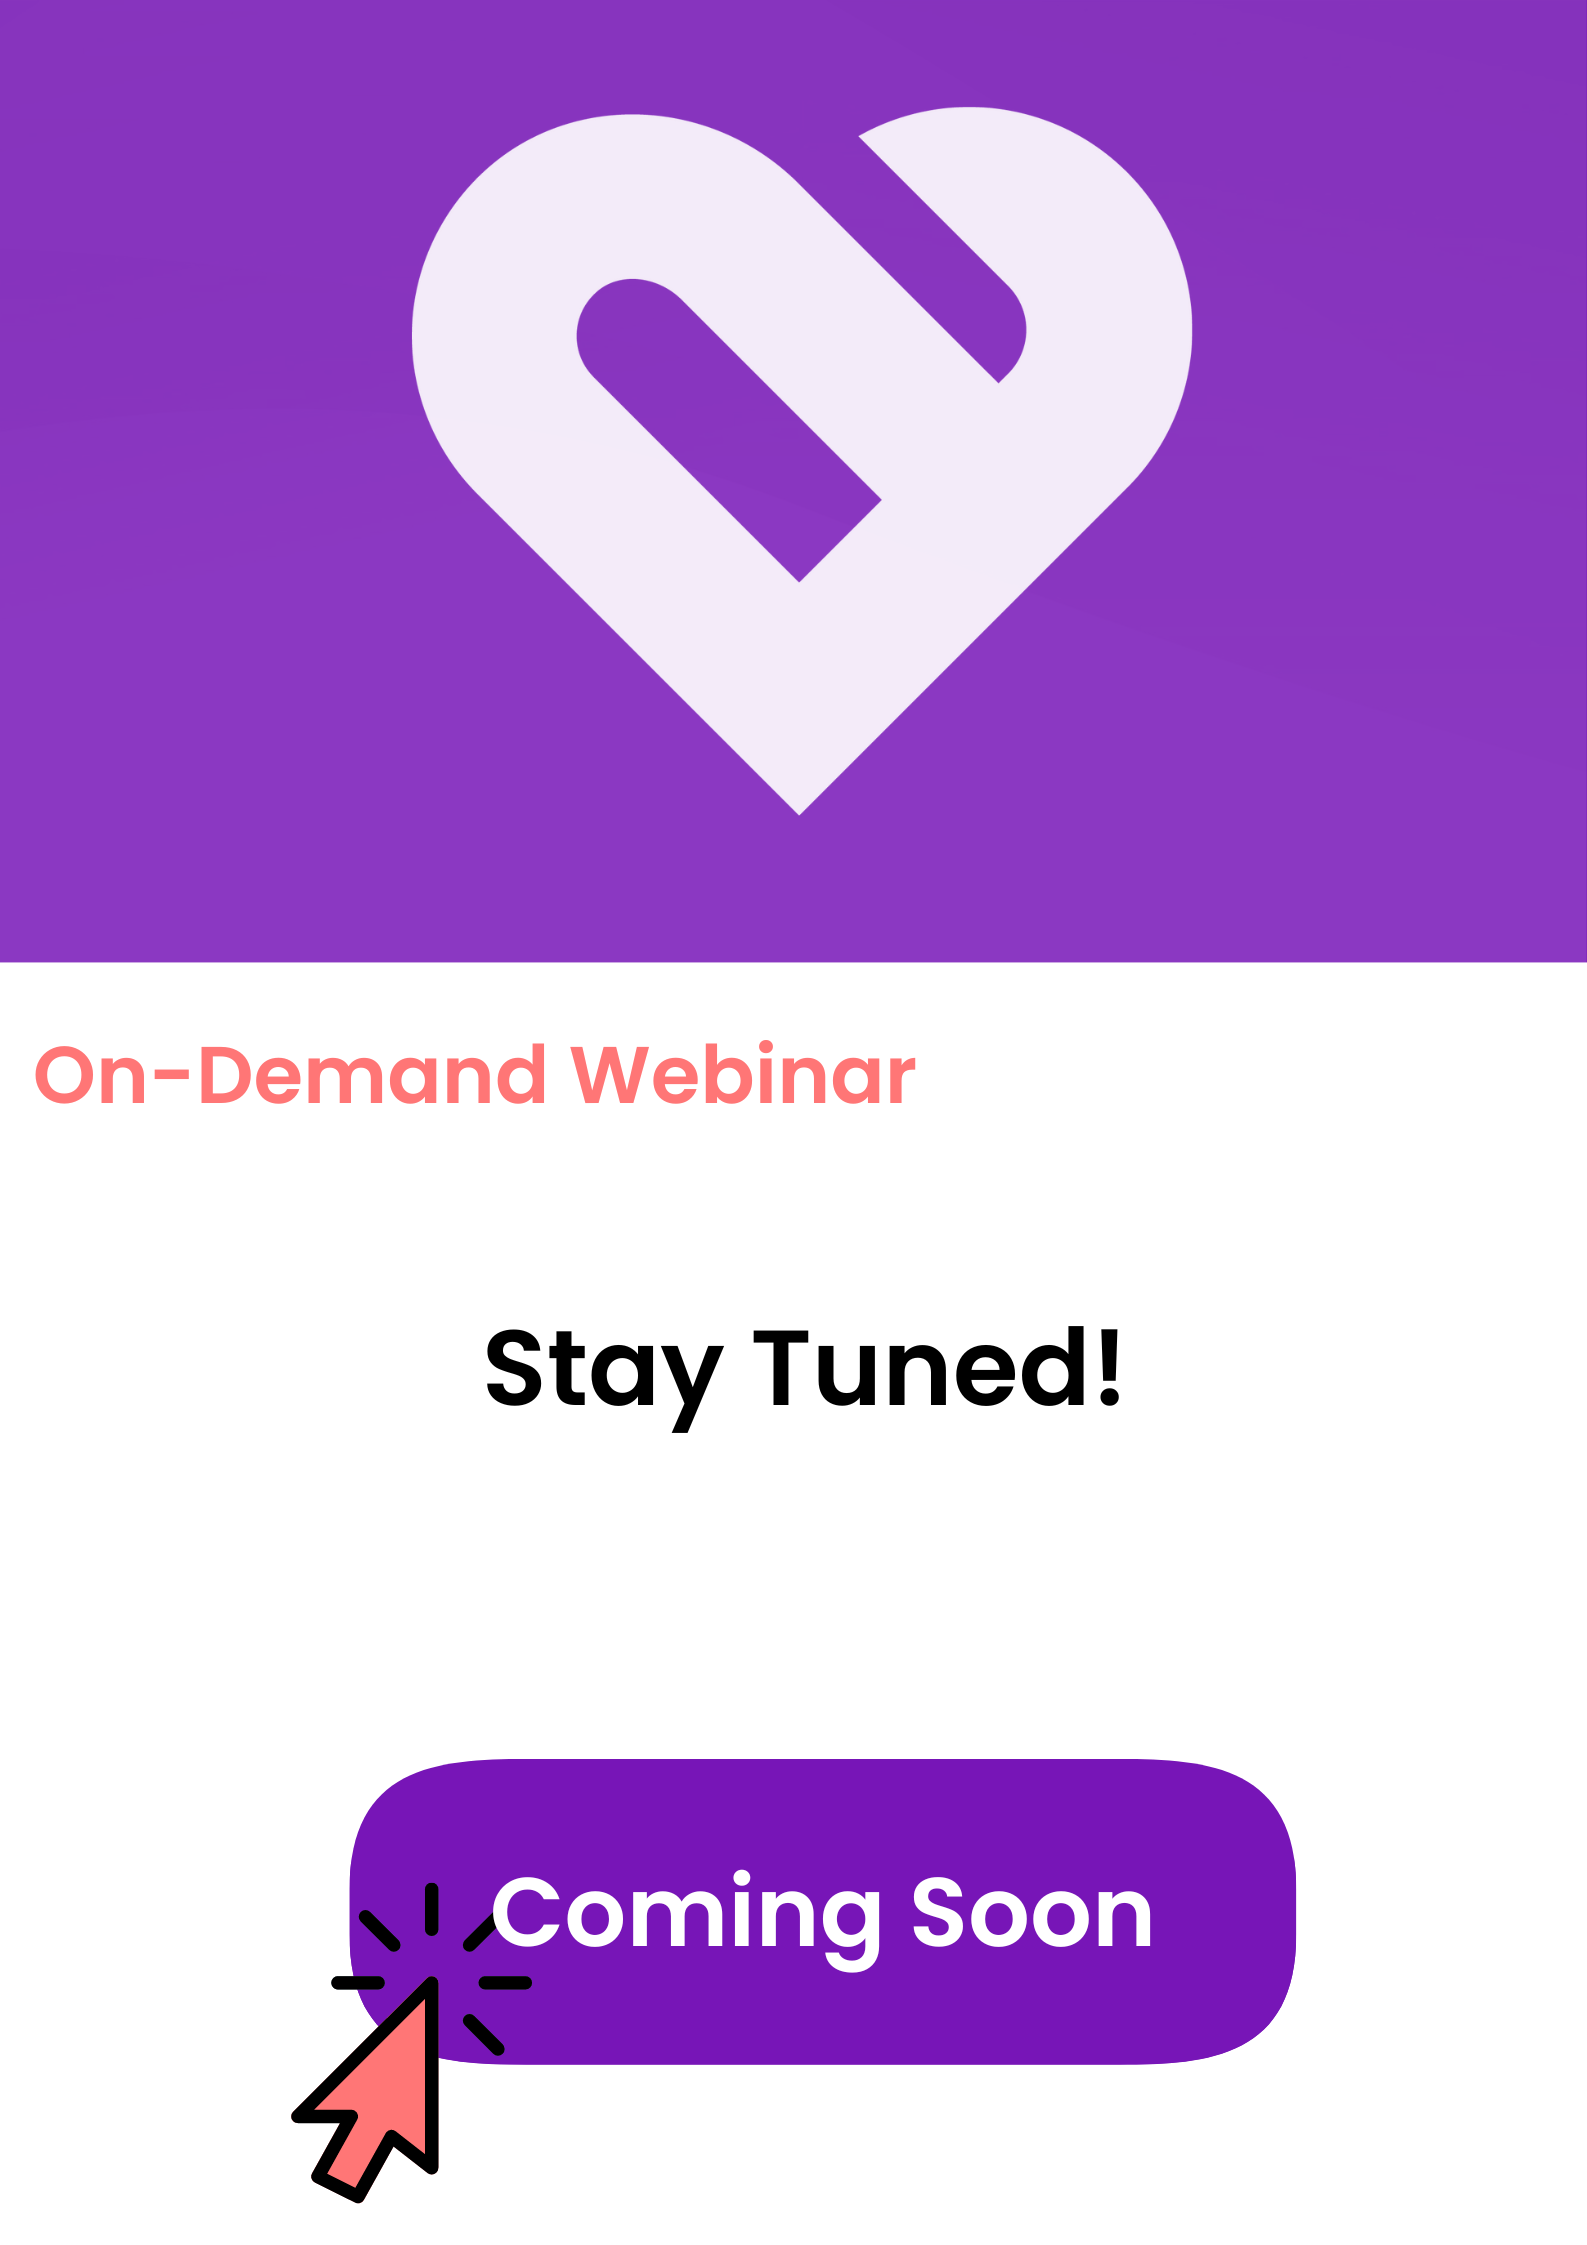 On-demand webinar tile for Stay Tuned, click to watch now